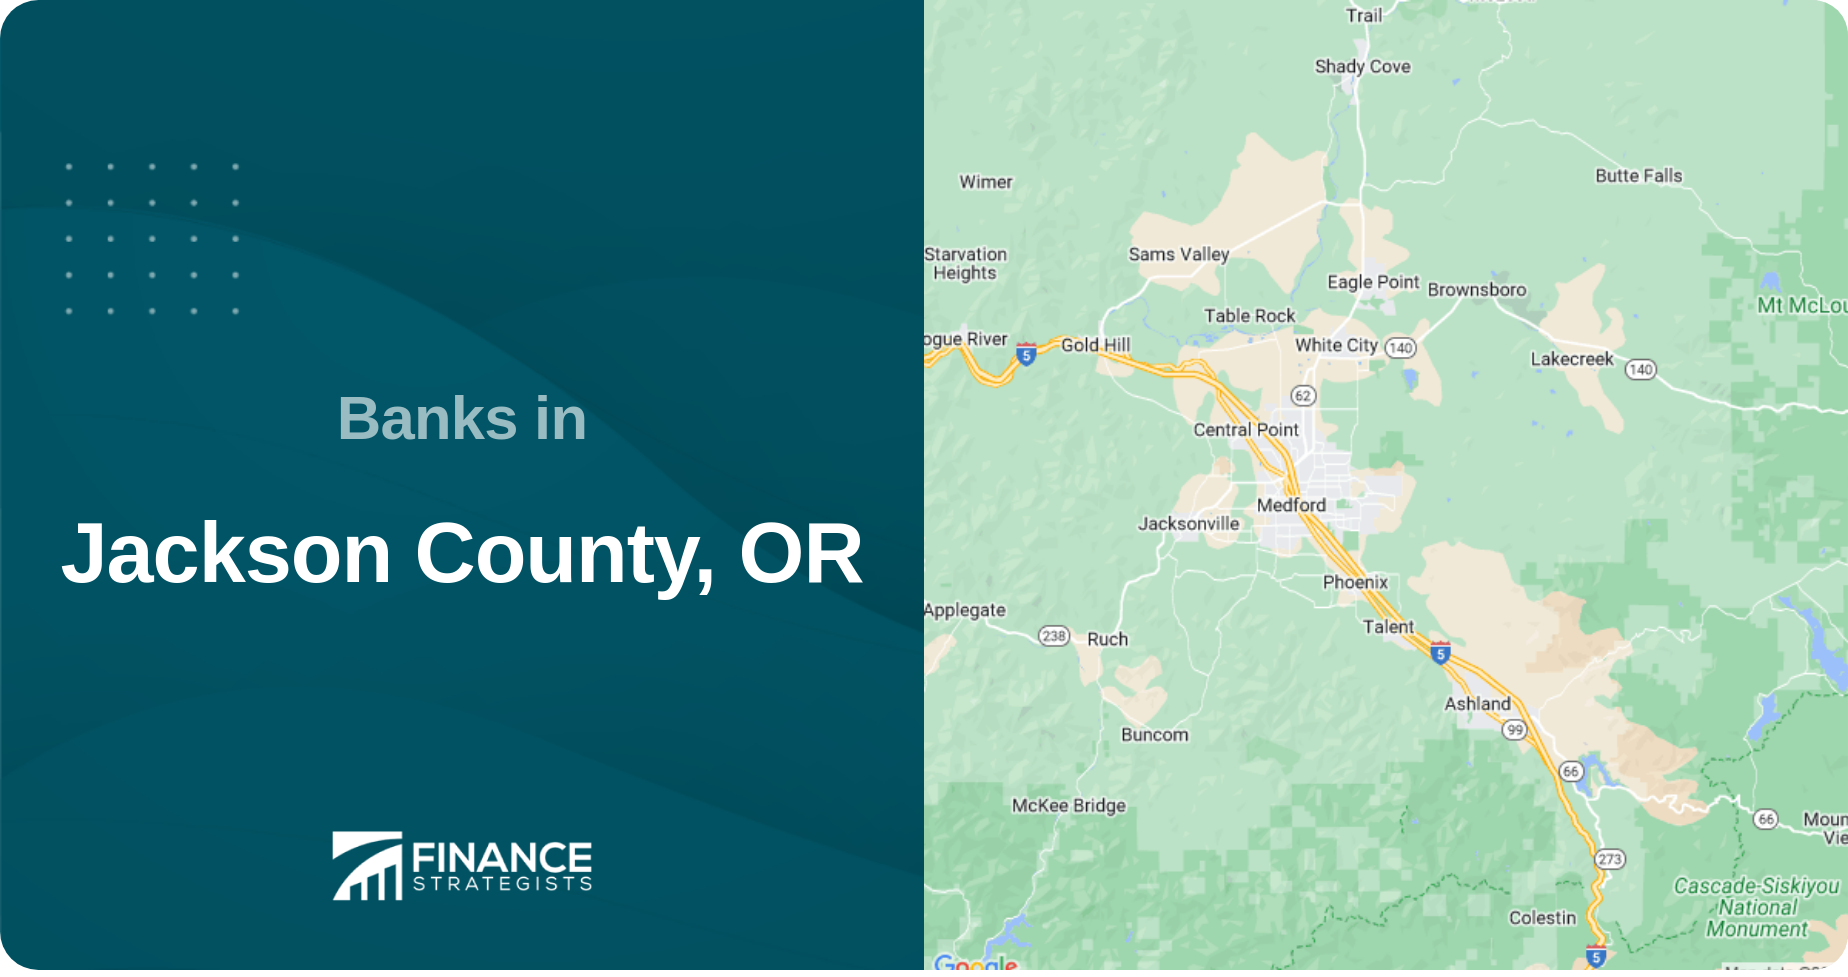 Banks in Jackson County, OR